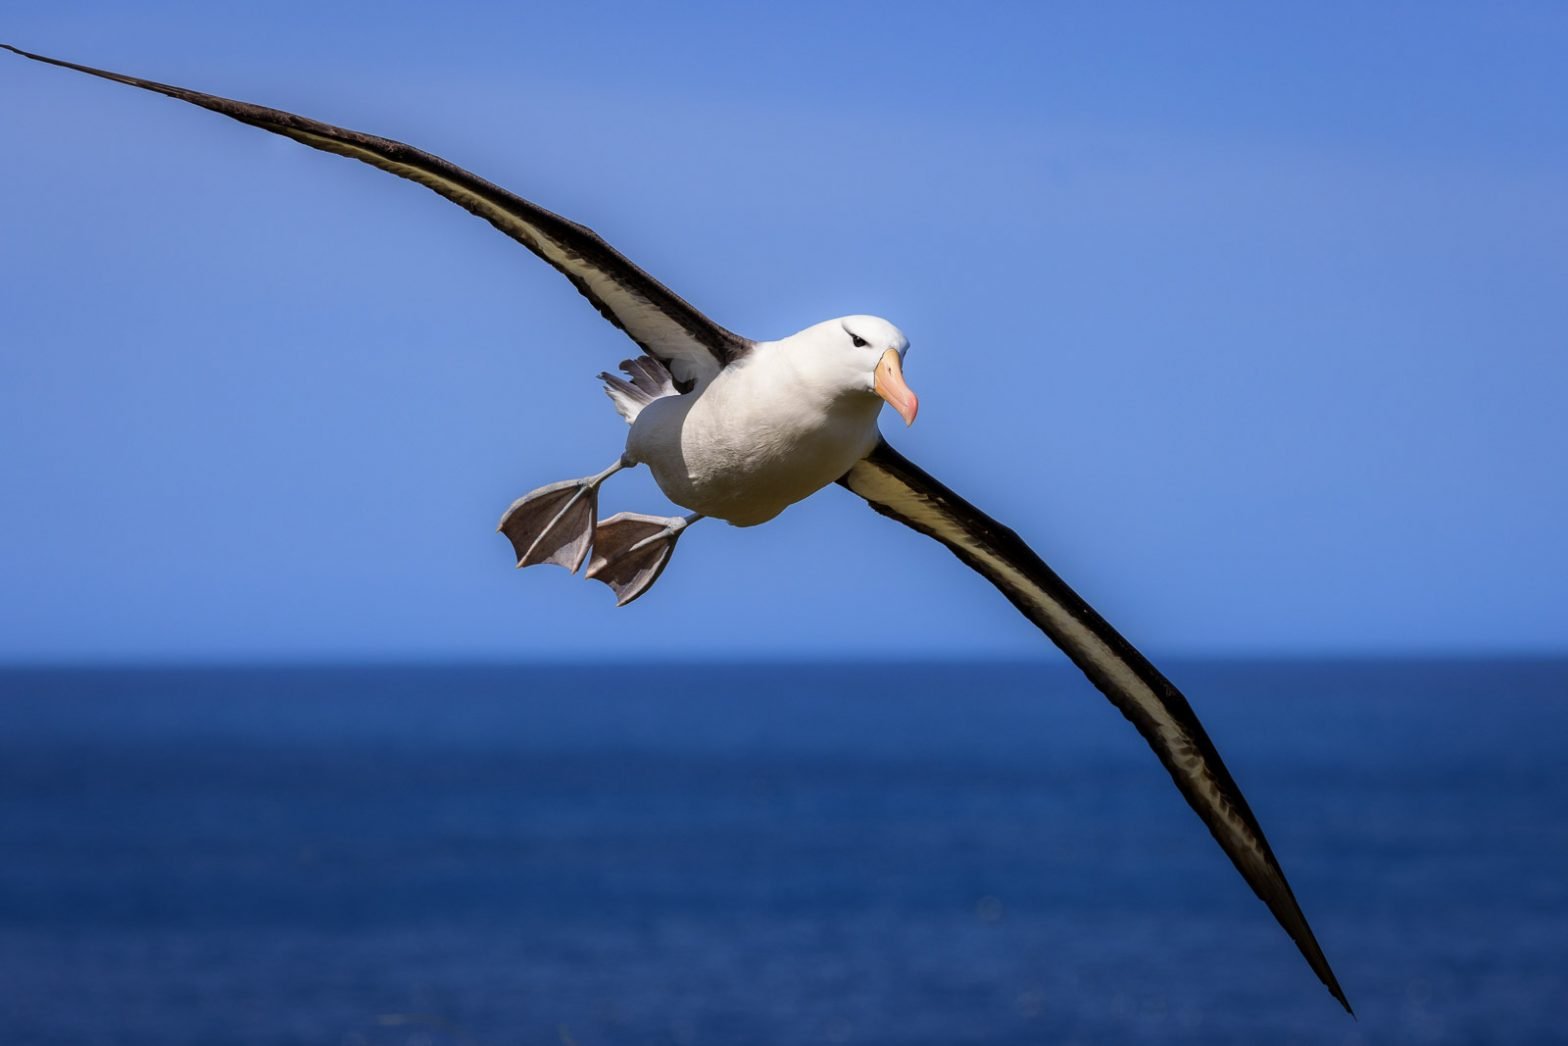 Why is the Albatross so remarkable?  It can spend over a year at sea without ever touching land.  It sleeps while flying on autopilot, one part of the brain sleeping while another part navigates.